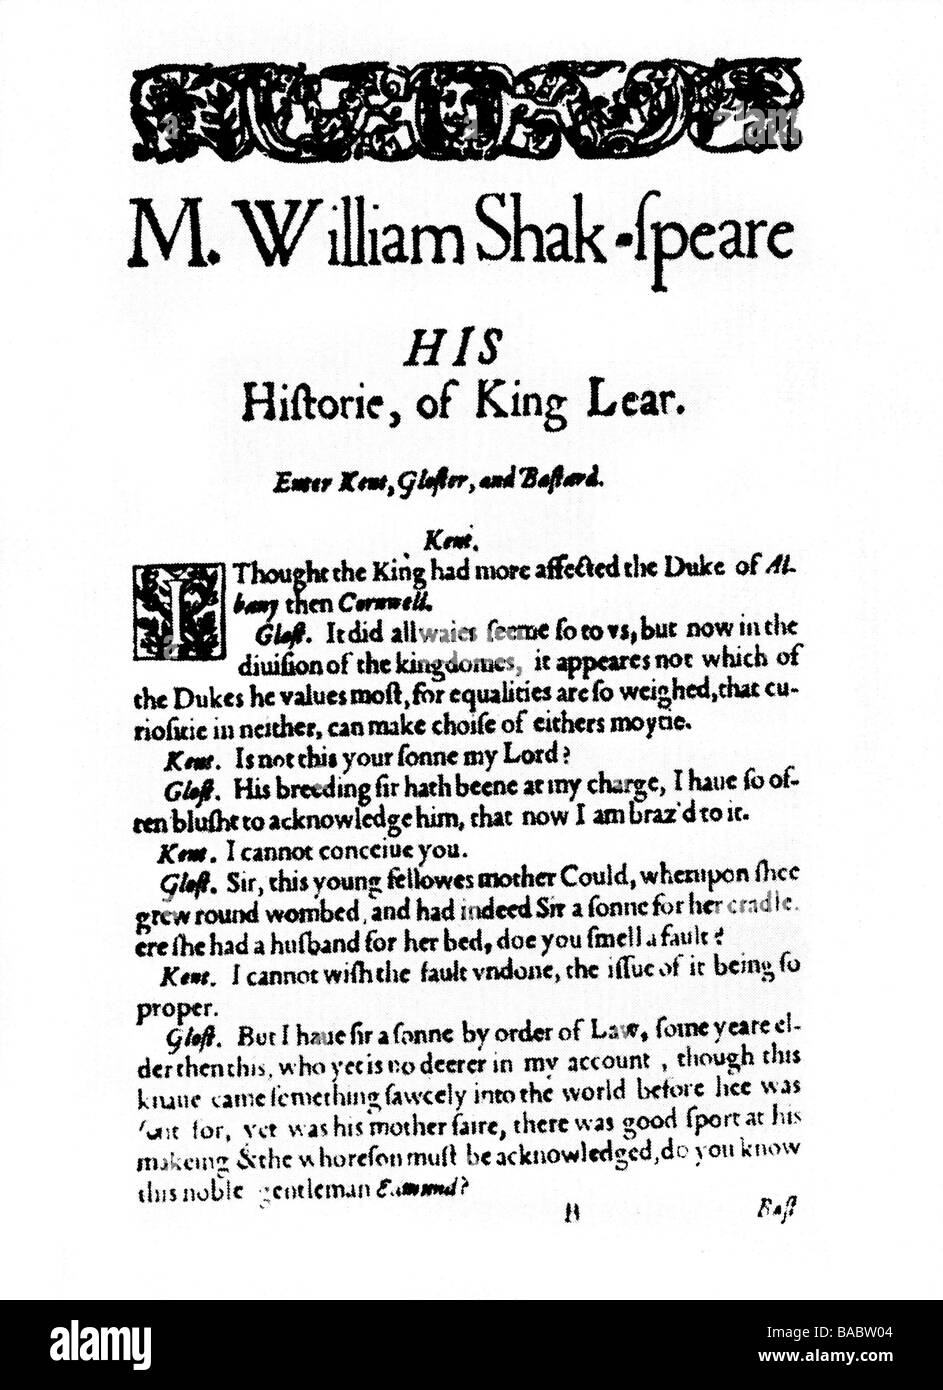 King Lear : modern English version side-by-side with full original text